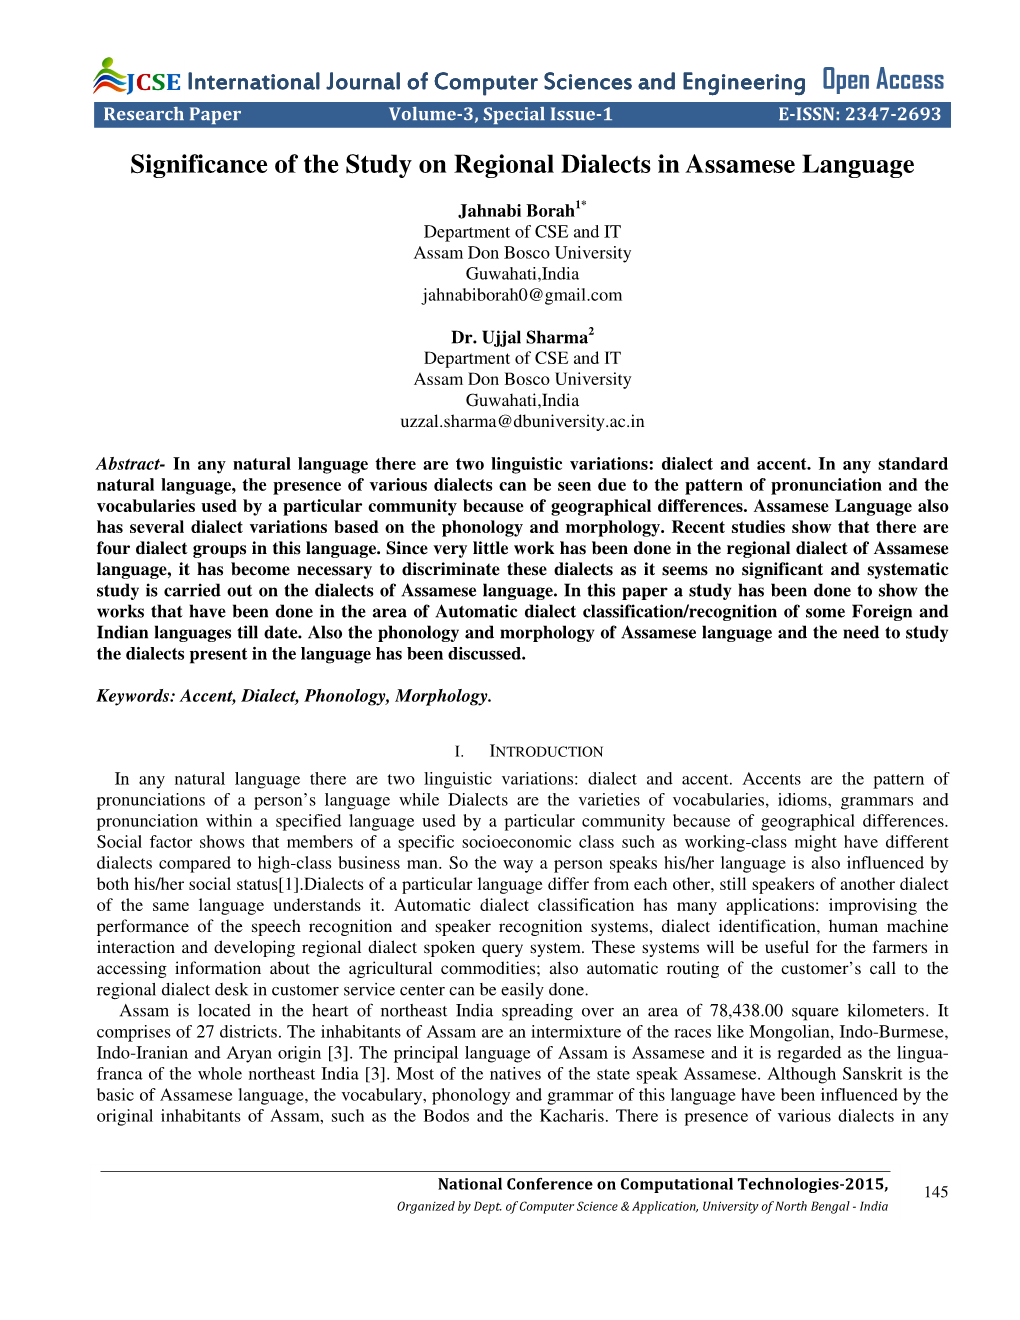 Significance of the Study on Regional Dialects in Assamese Language